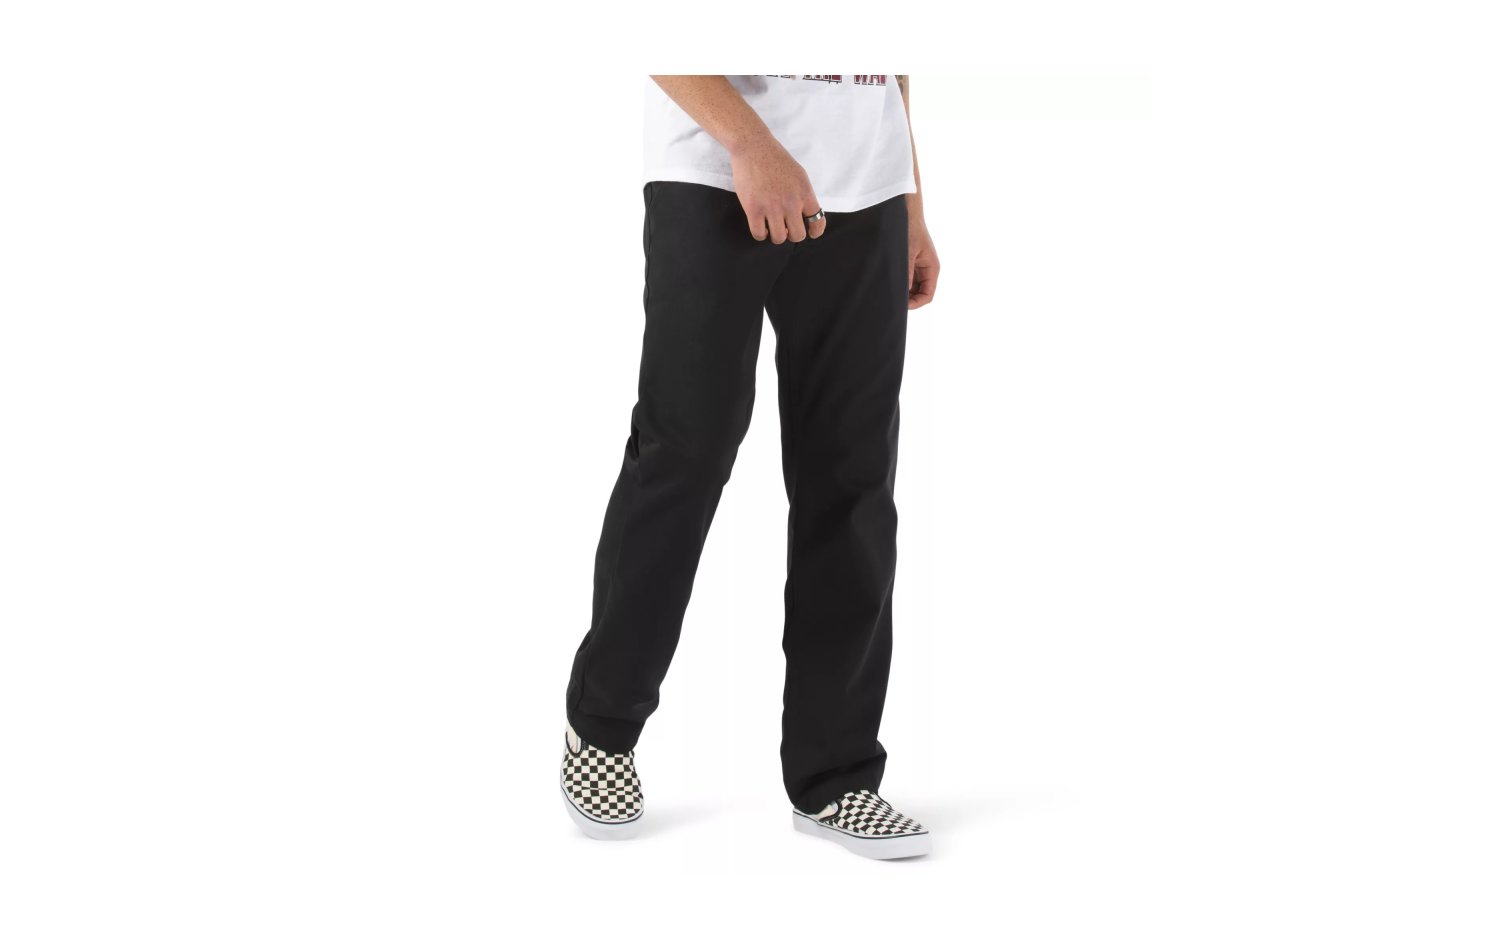 Vans Authentic Chino Relaxed Pant (VN0A5FJ8BLK)